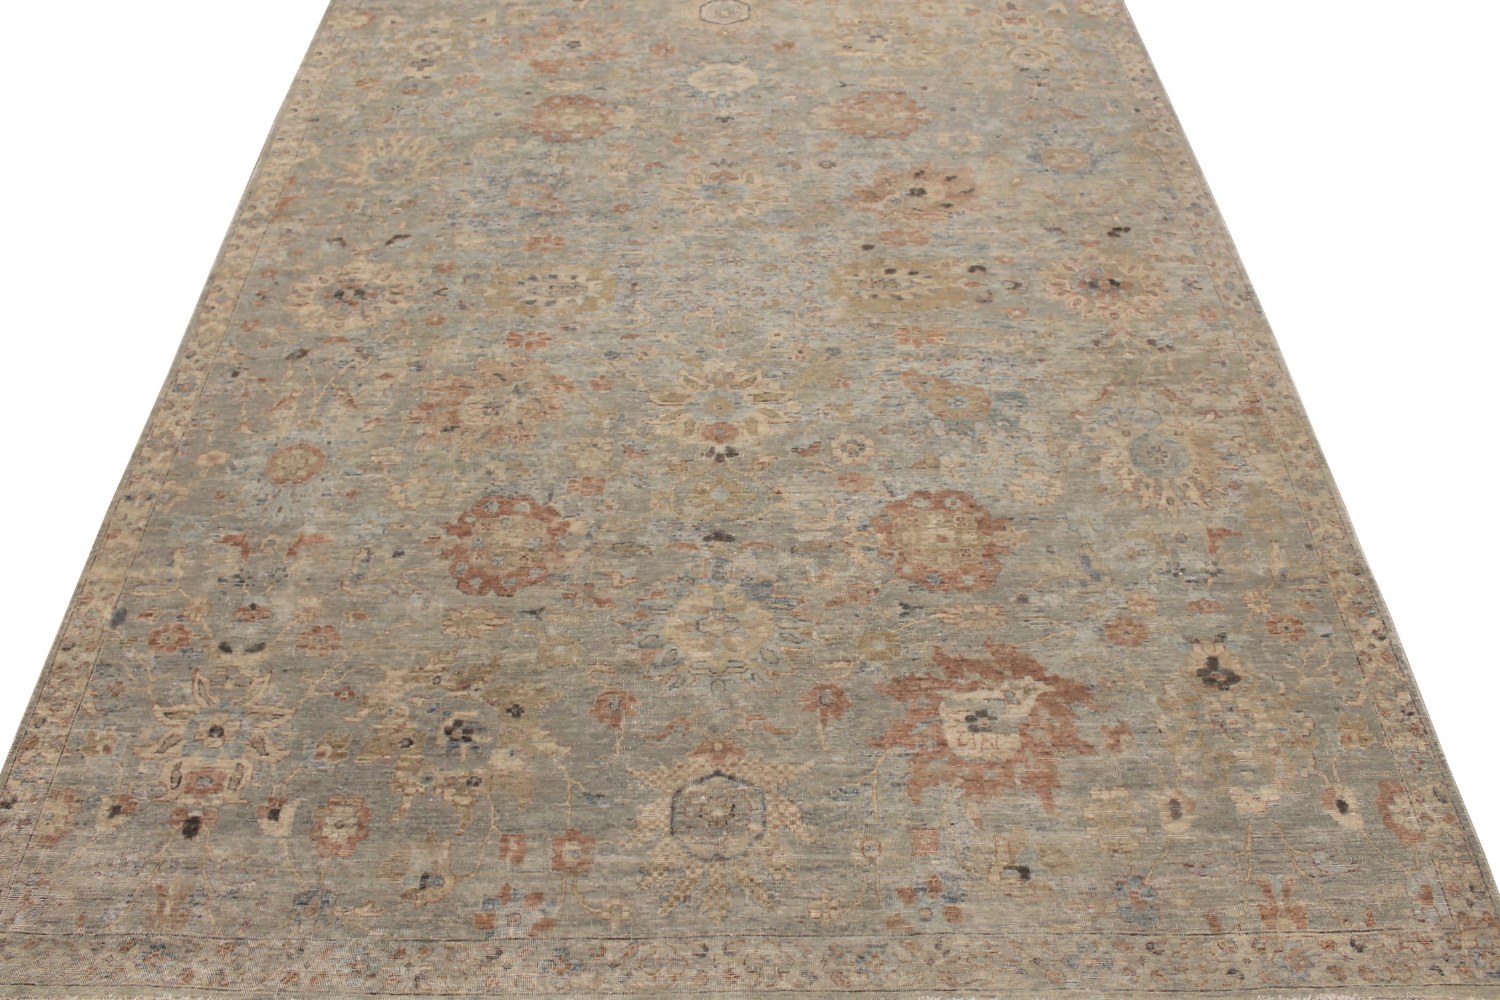 9x12 Aryana & Antique Revivals Hand Knotted Wool Area Rug - MR028544